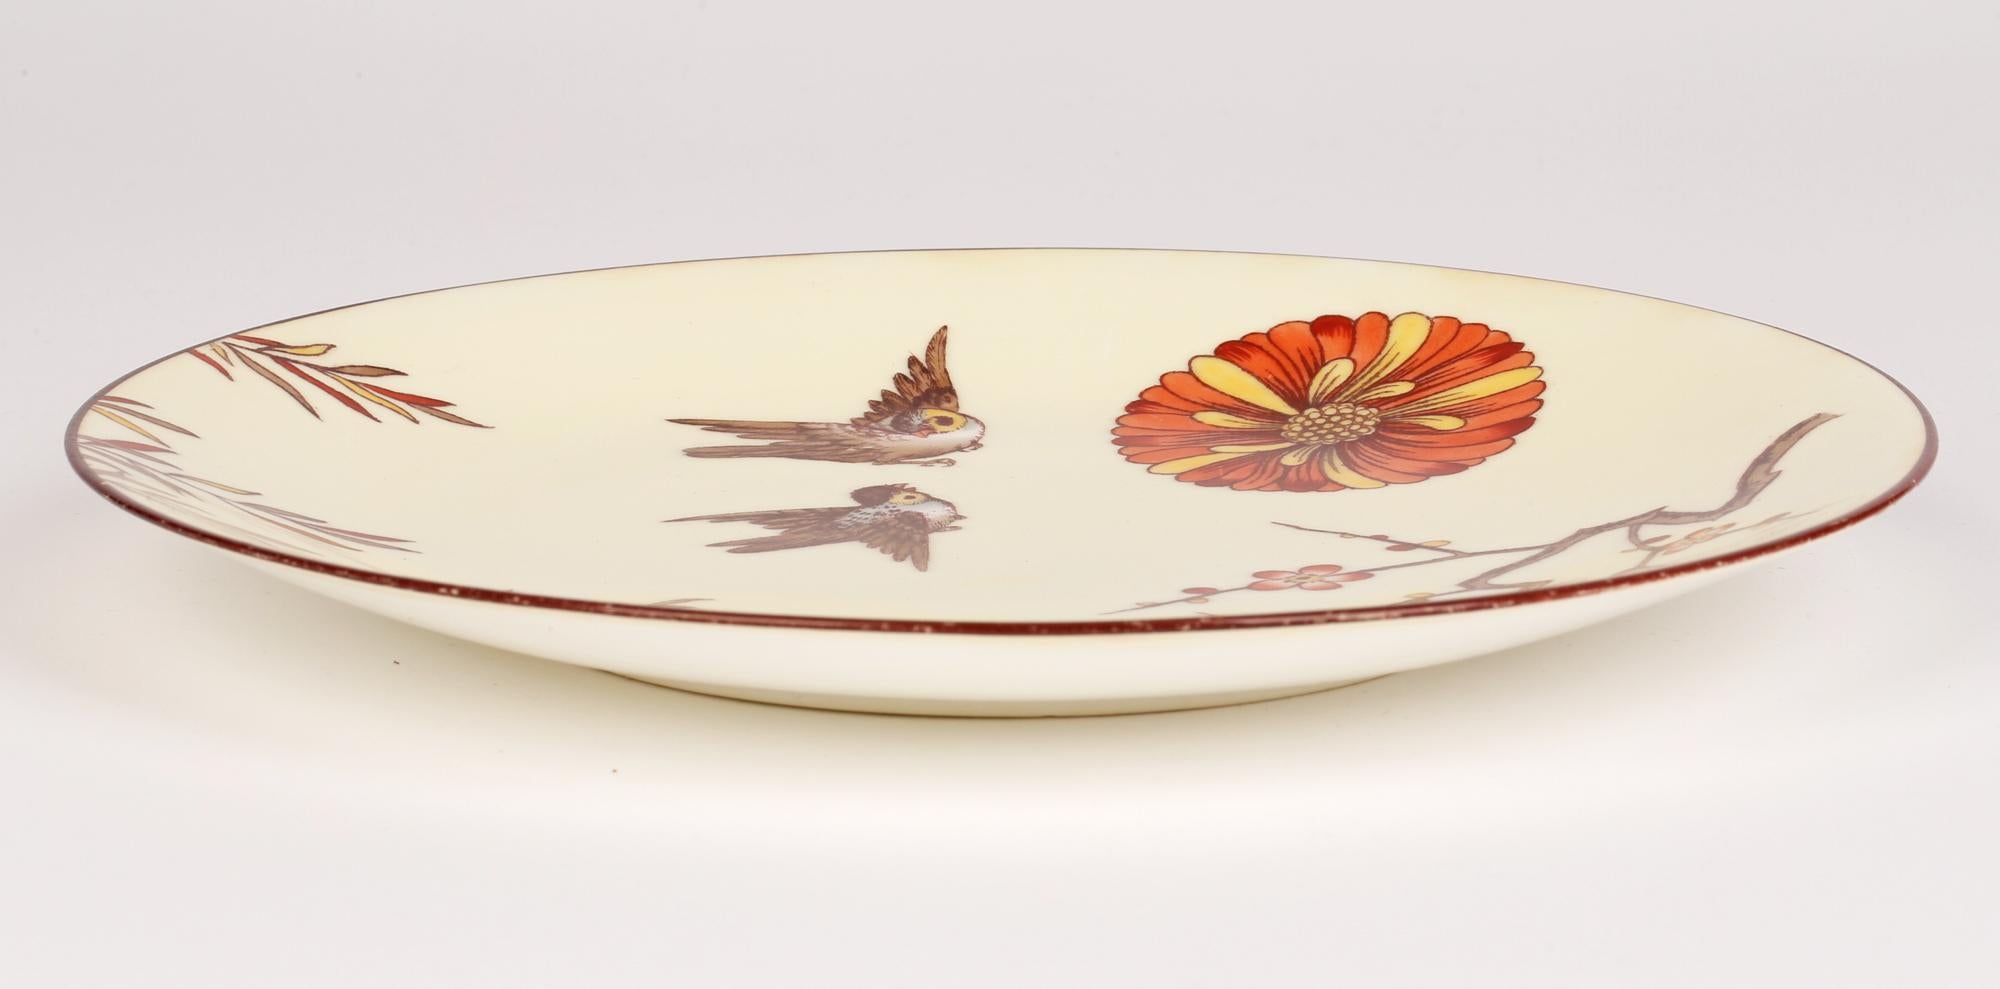 Minton Porcelain Cabinet Plate Attributed to Christopher Dresser, 1880 For Sale 9